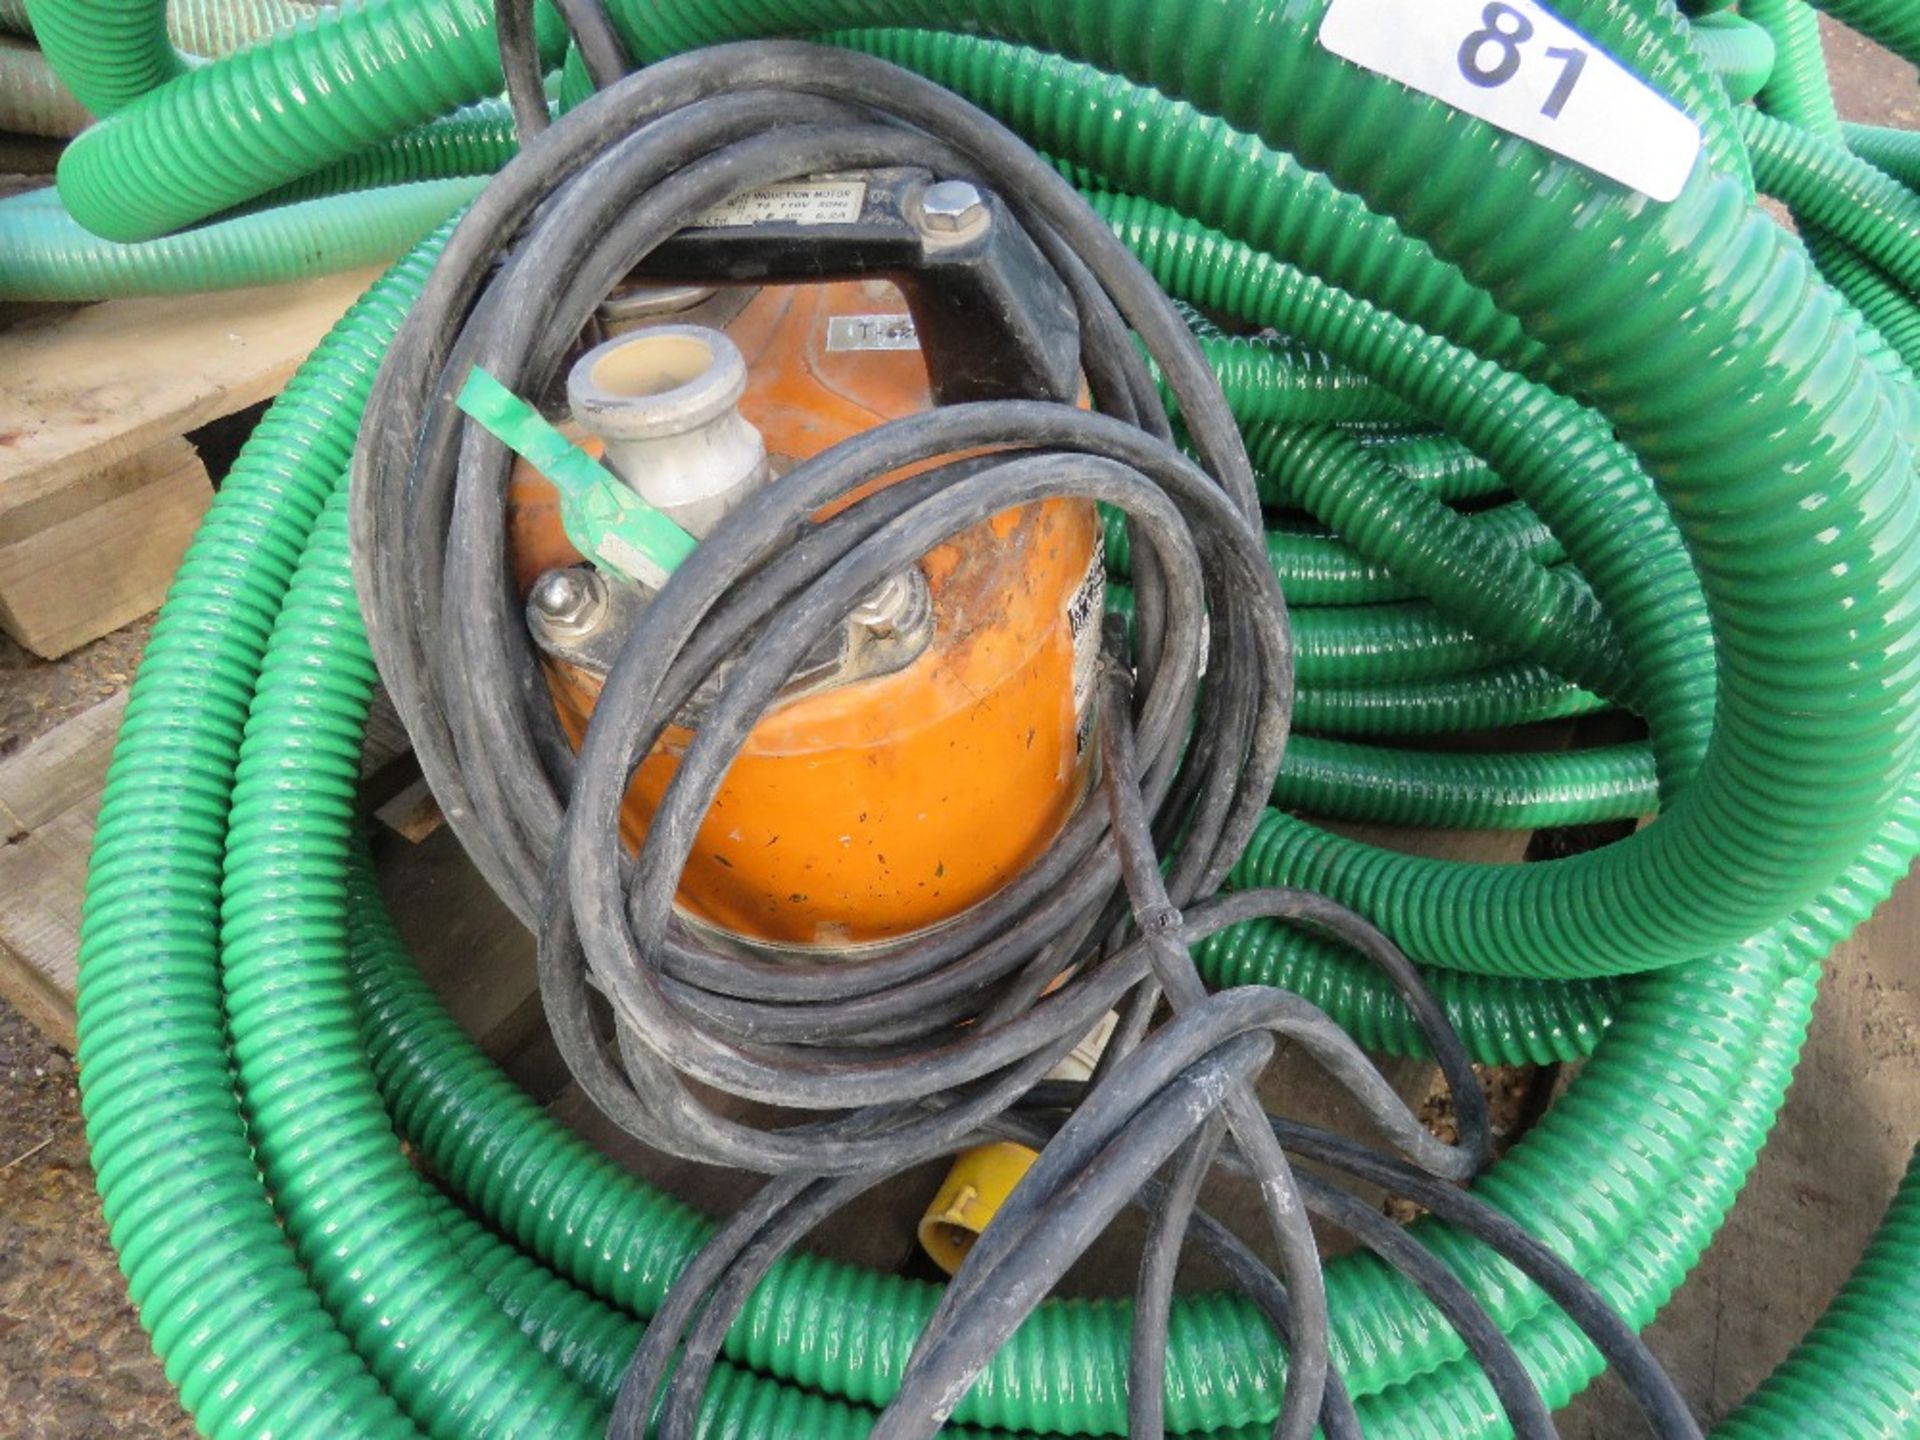 SUBMERSIBLE WATER PUMP, 110VOLT PLUS A LARGE QUANTITY OF 1.5" HOSE. DIRECT FROM LOCAL COMPANY. - Image 2 of 5